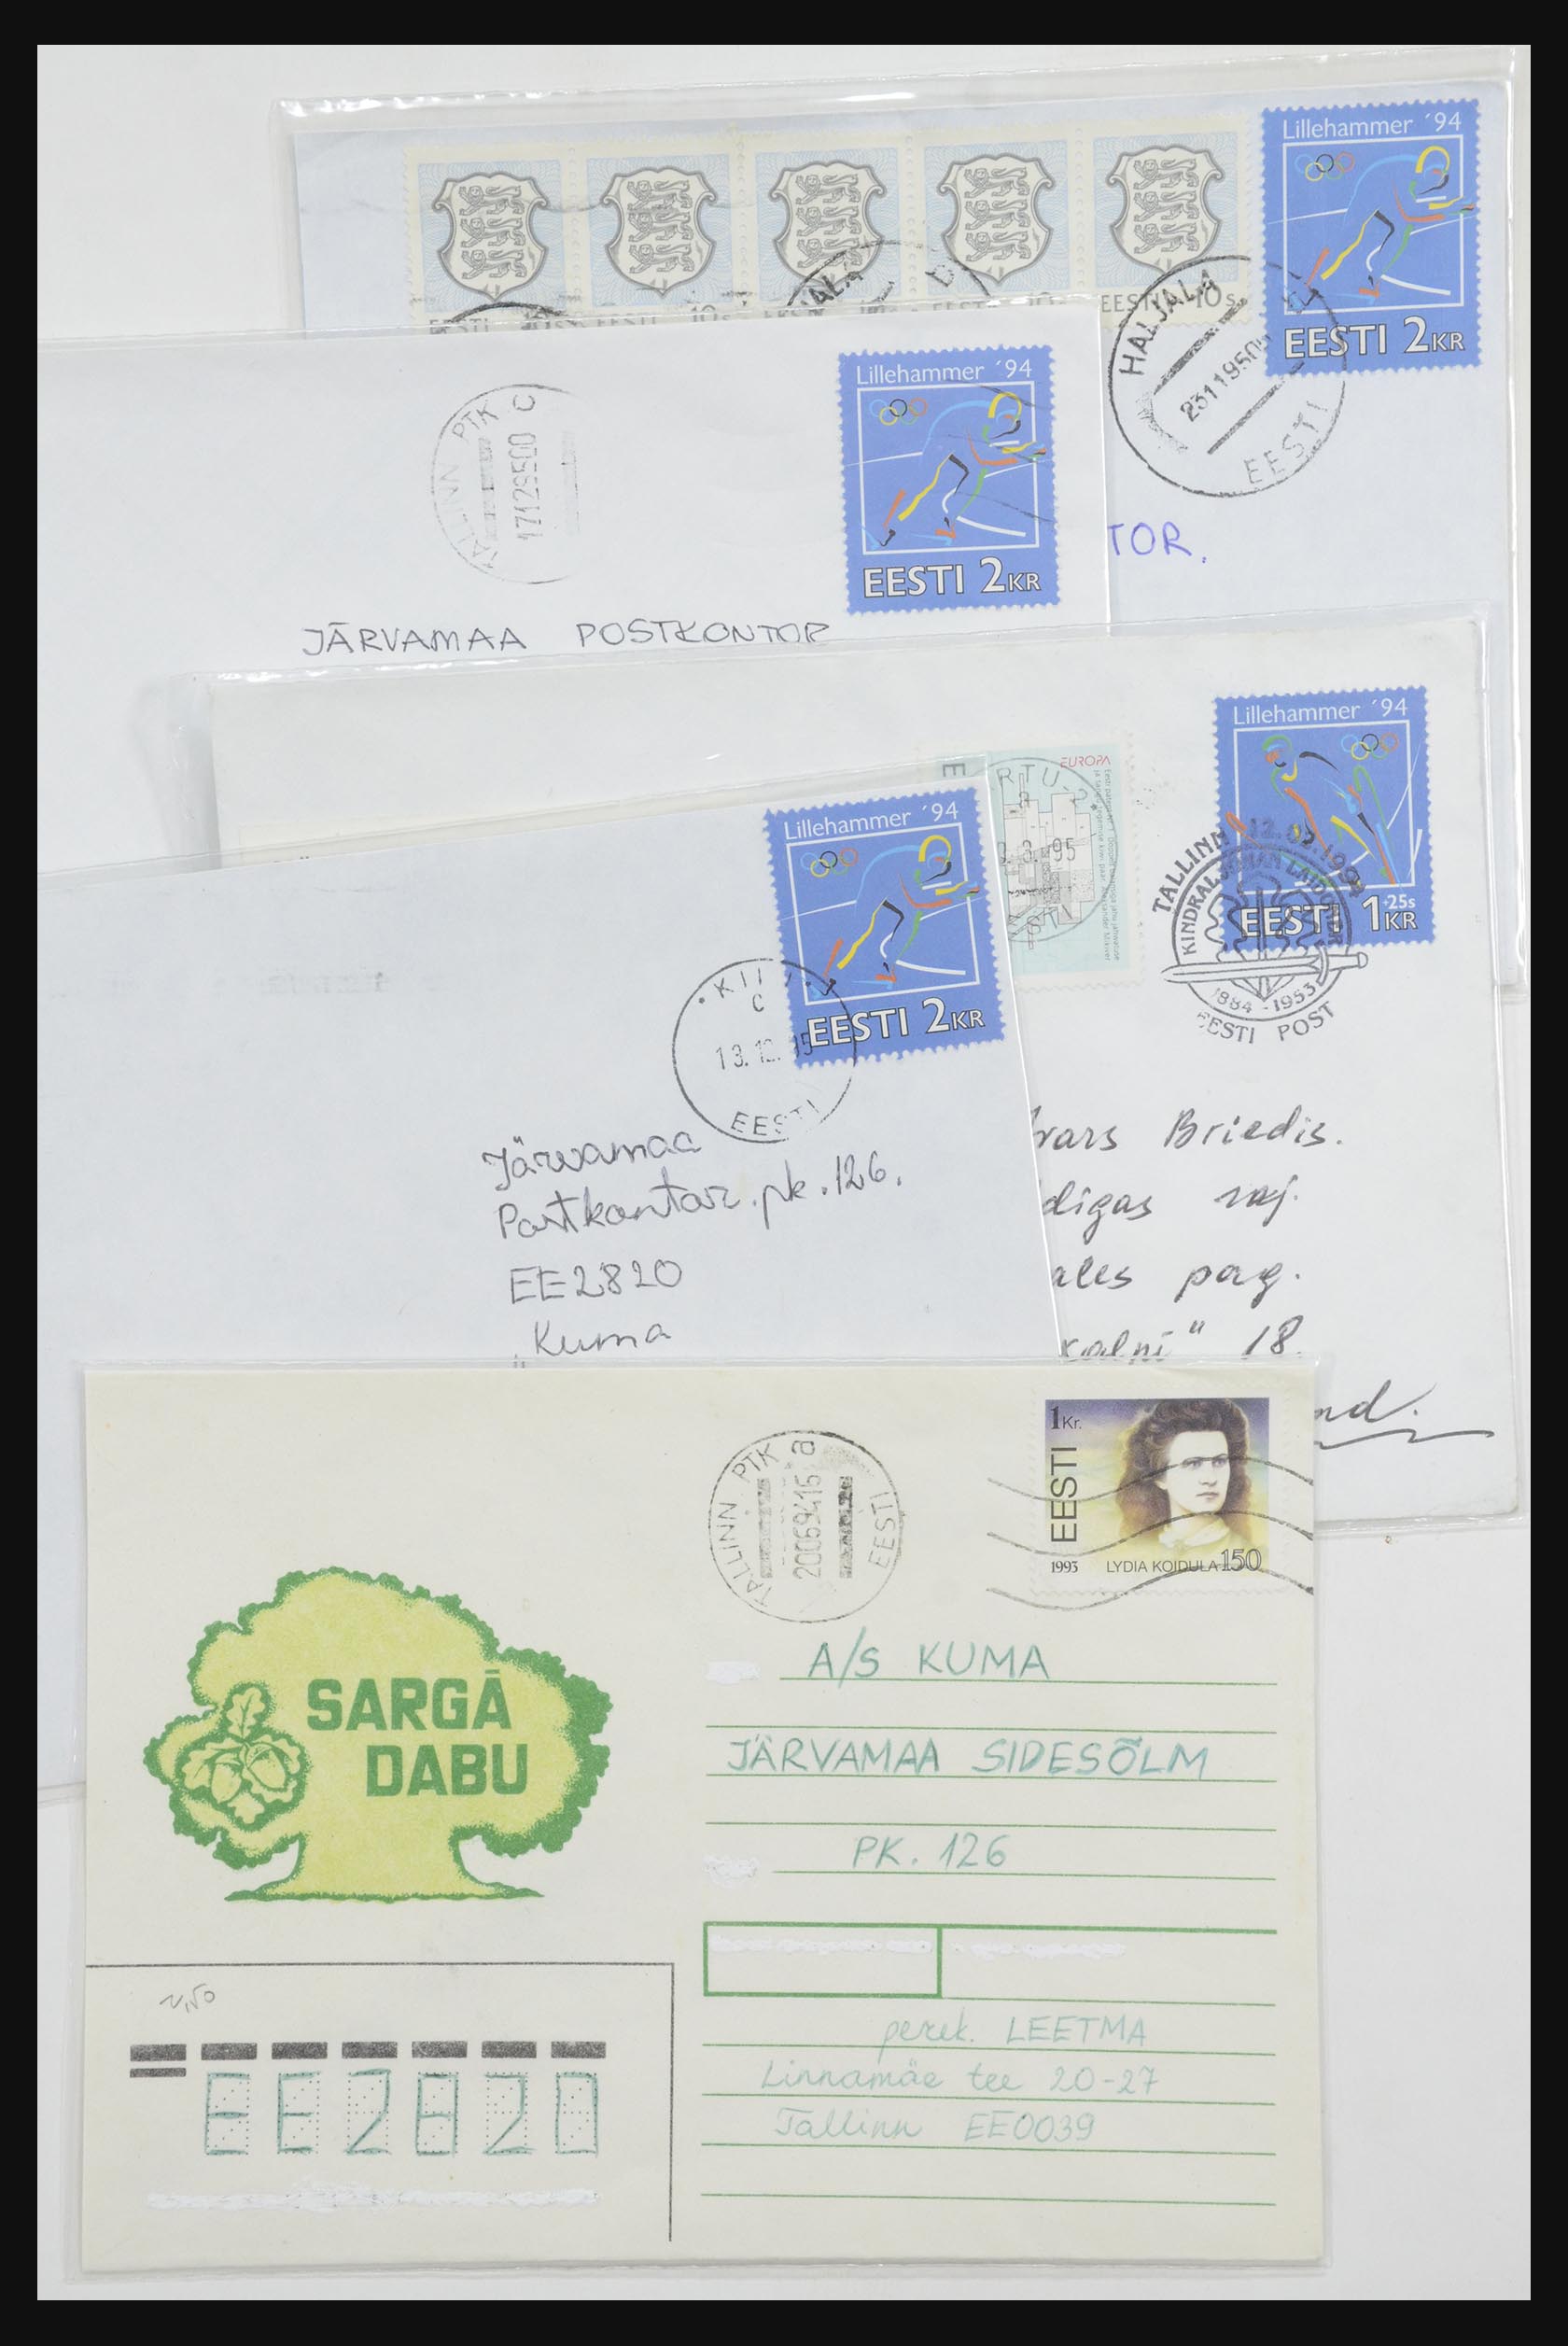 31928 1727 - 31928 Eastern Europe covers 1960's-1990's.